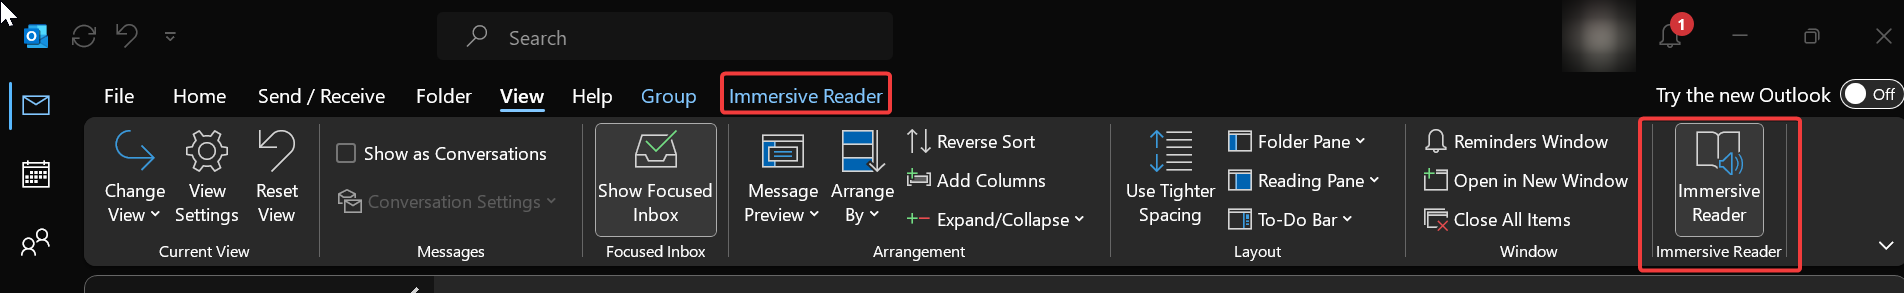 Outlook fonts have changed